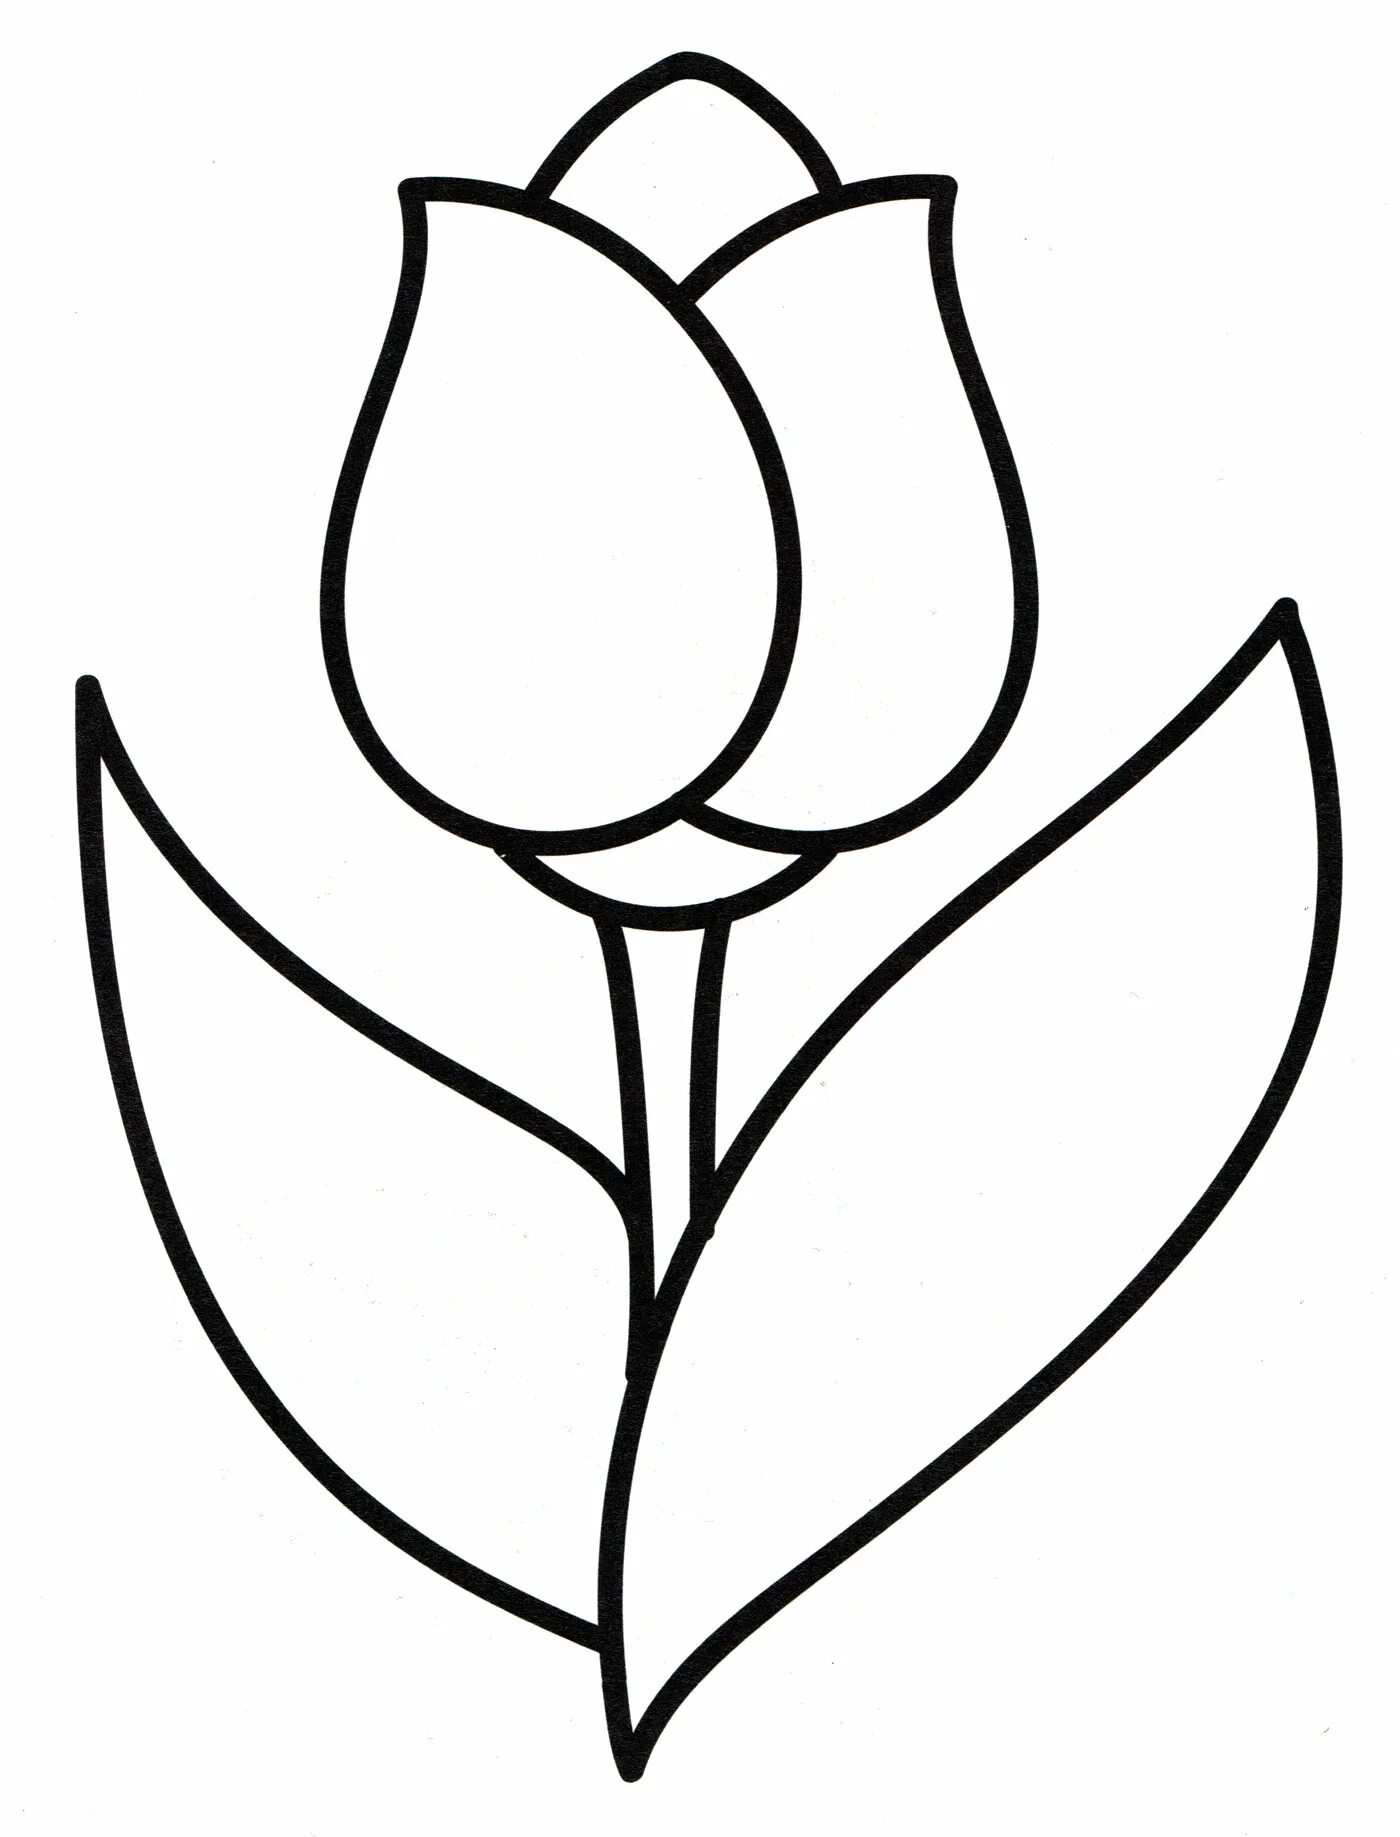 Coloring book shining tulips for children